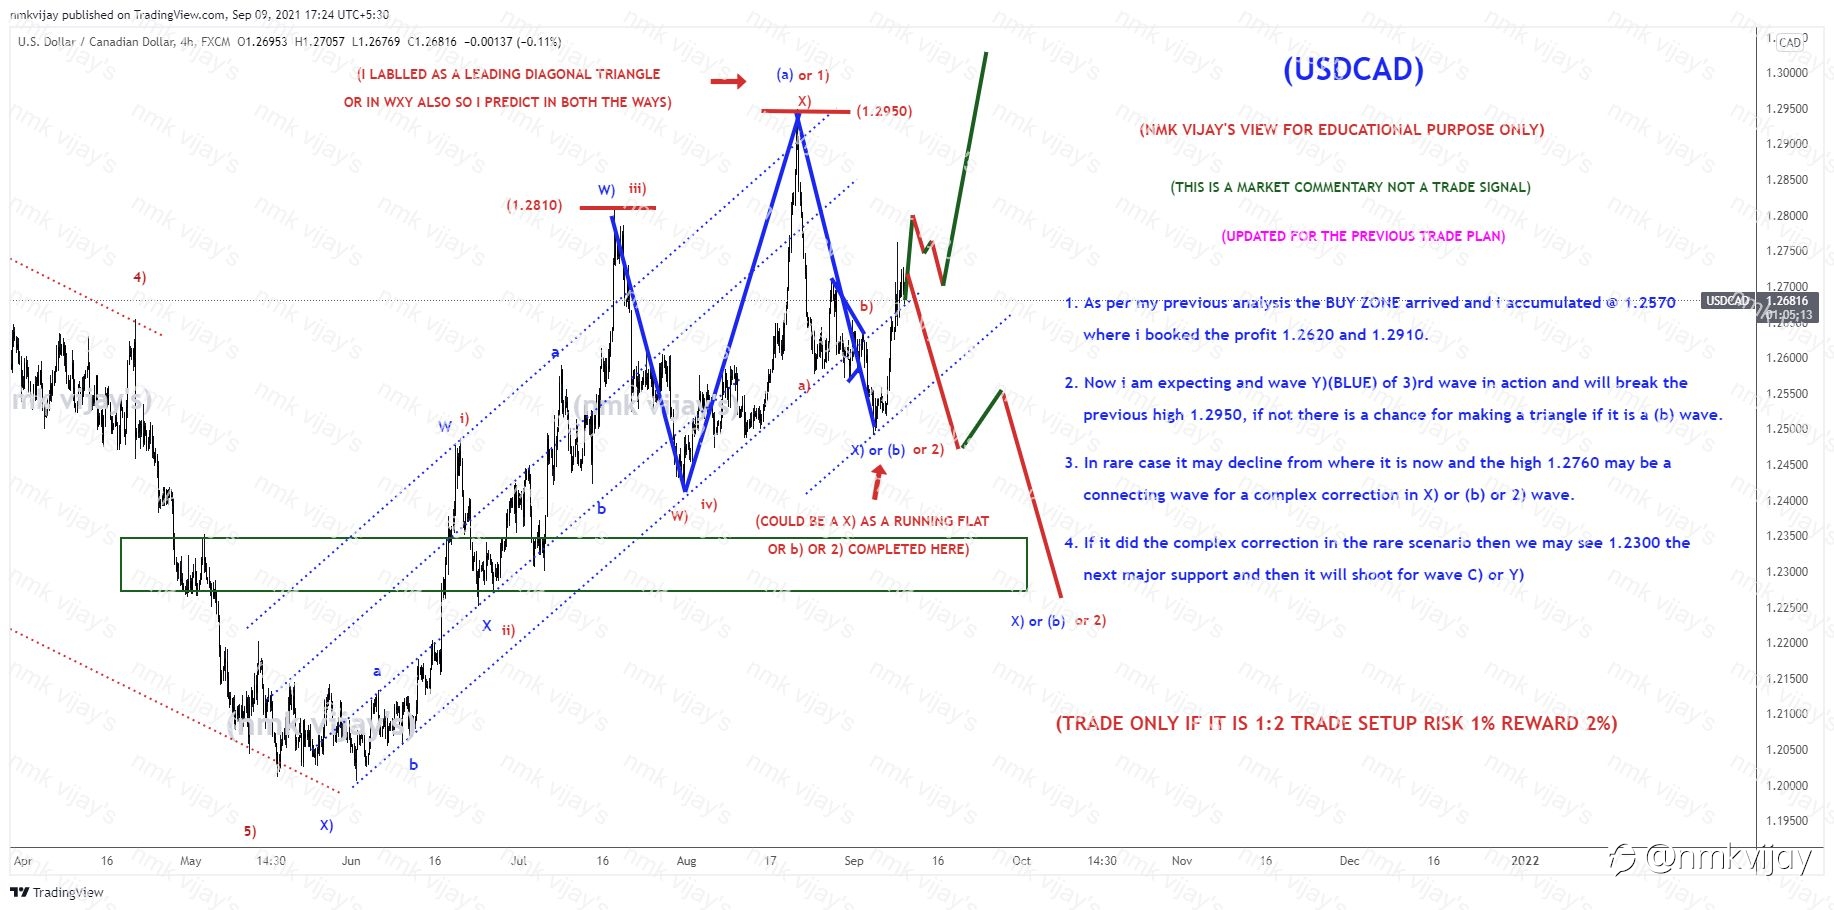 USDCAD-Will break 1.2950 or will make a complex correction ?